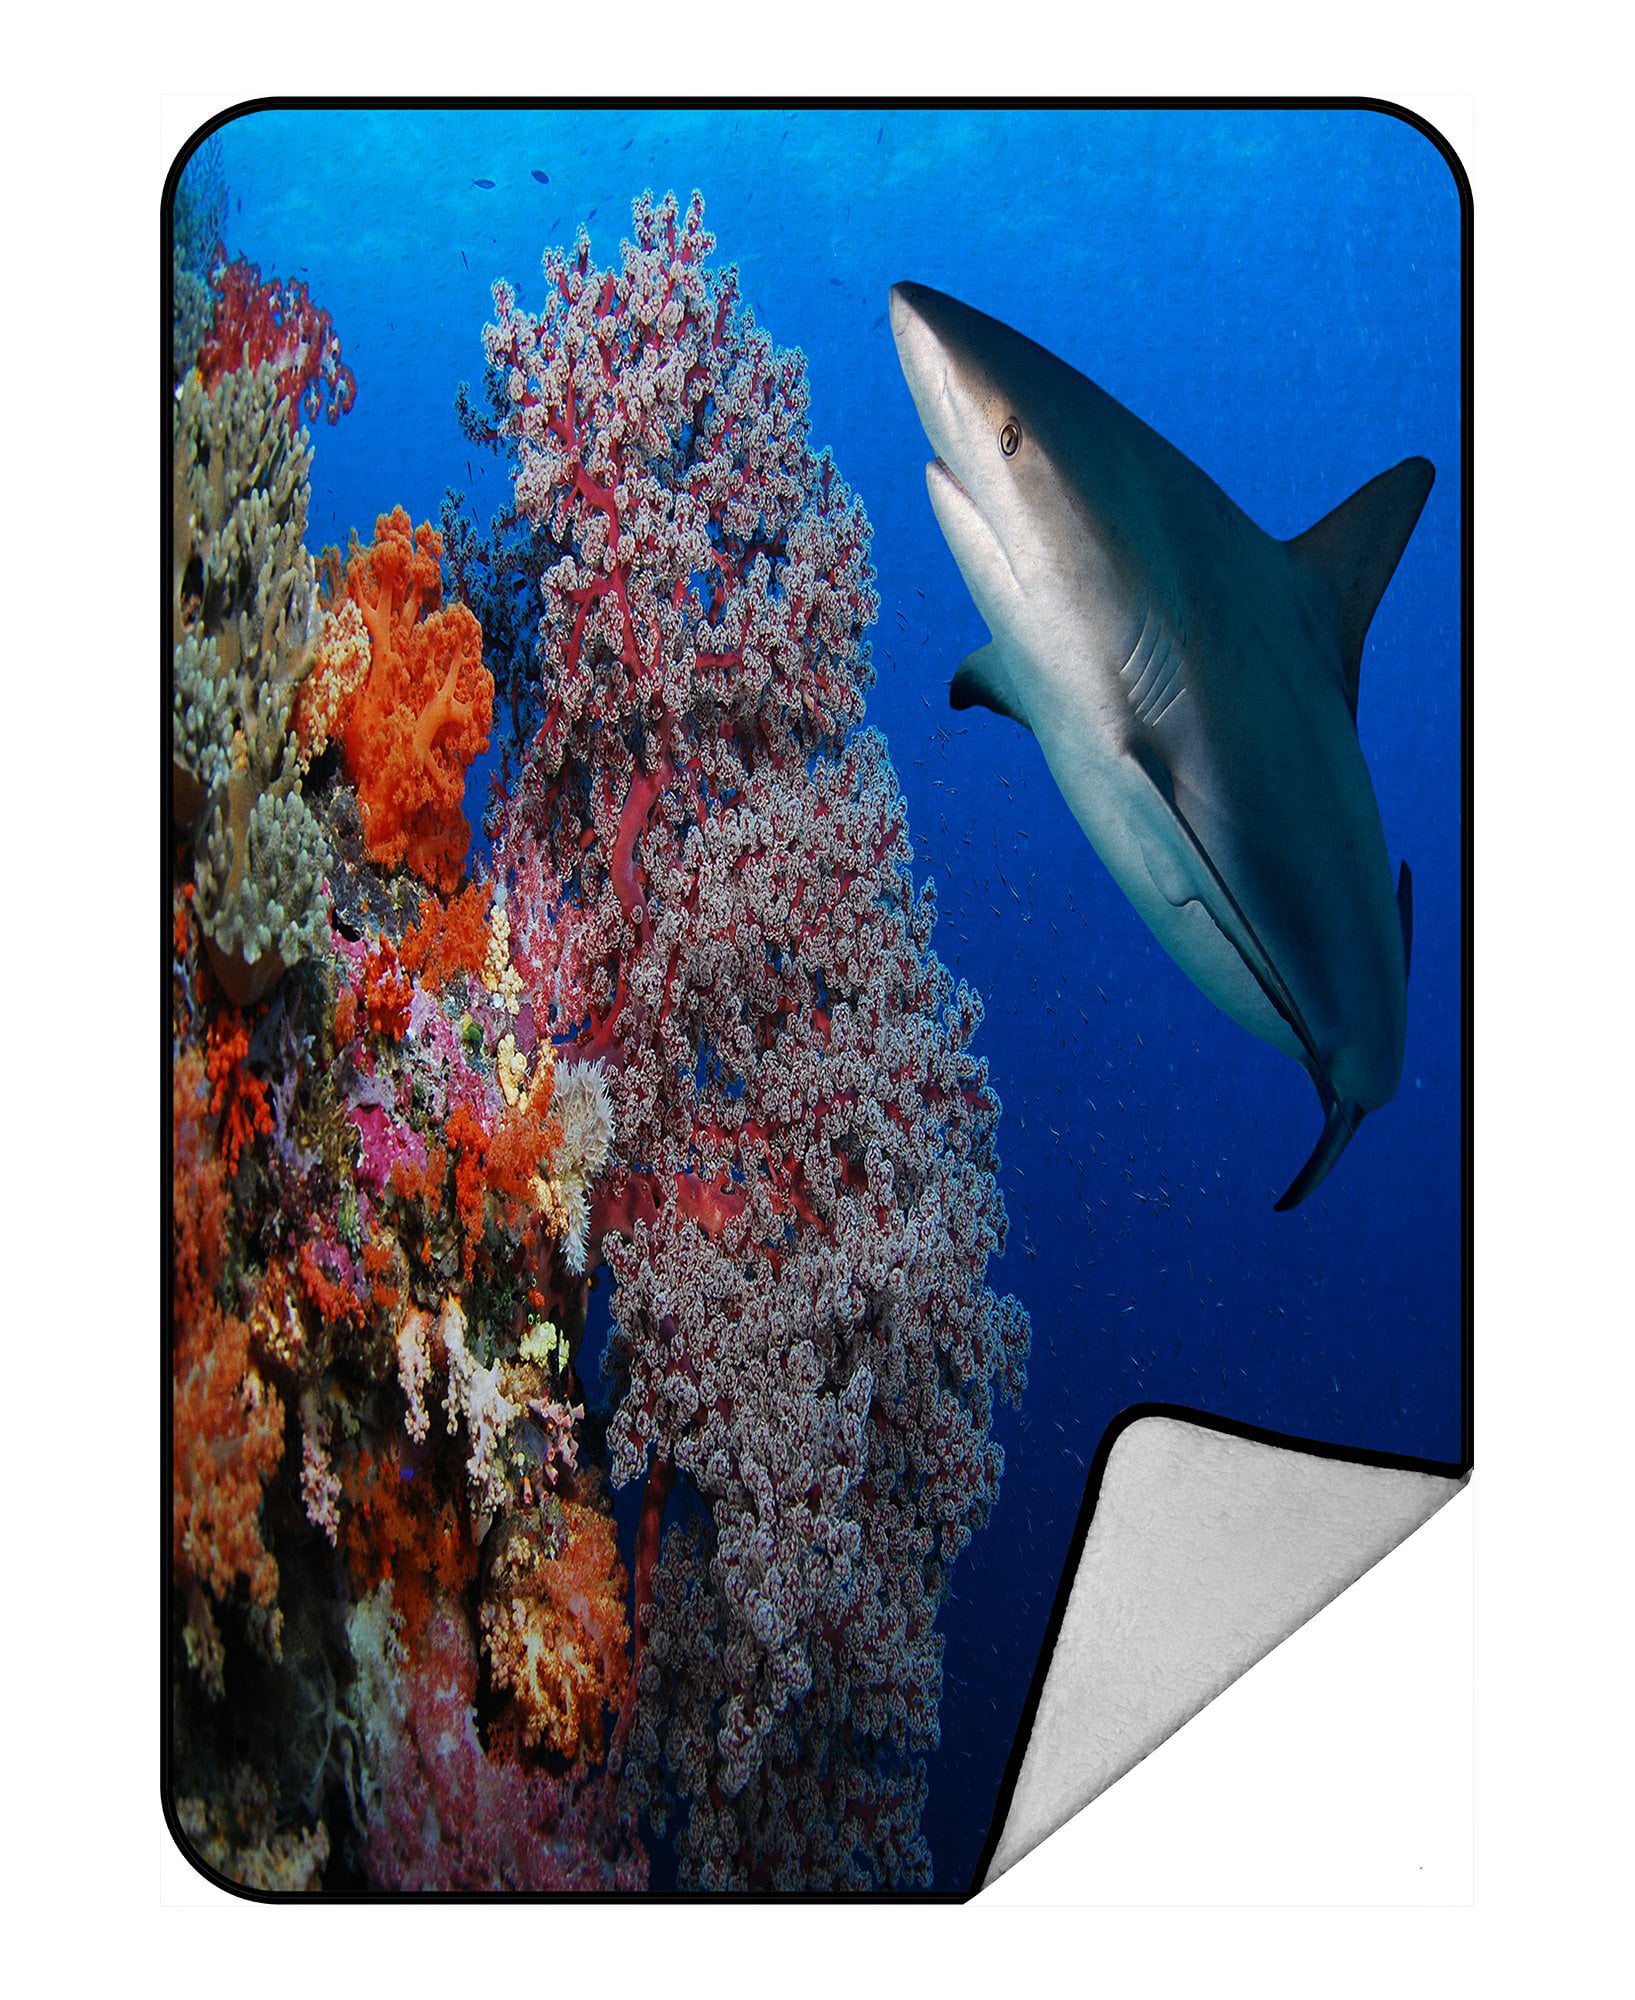 Caribbean Reef Exhibit Tank Sea Coral Reef Throw Blanket for Couch Sofa Bed Plush Fleece Blanket Soft Cozy Bedding for Kids and Adults Room Bedroom